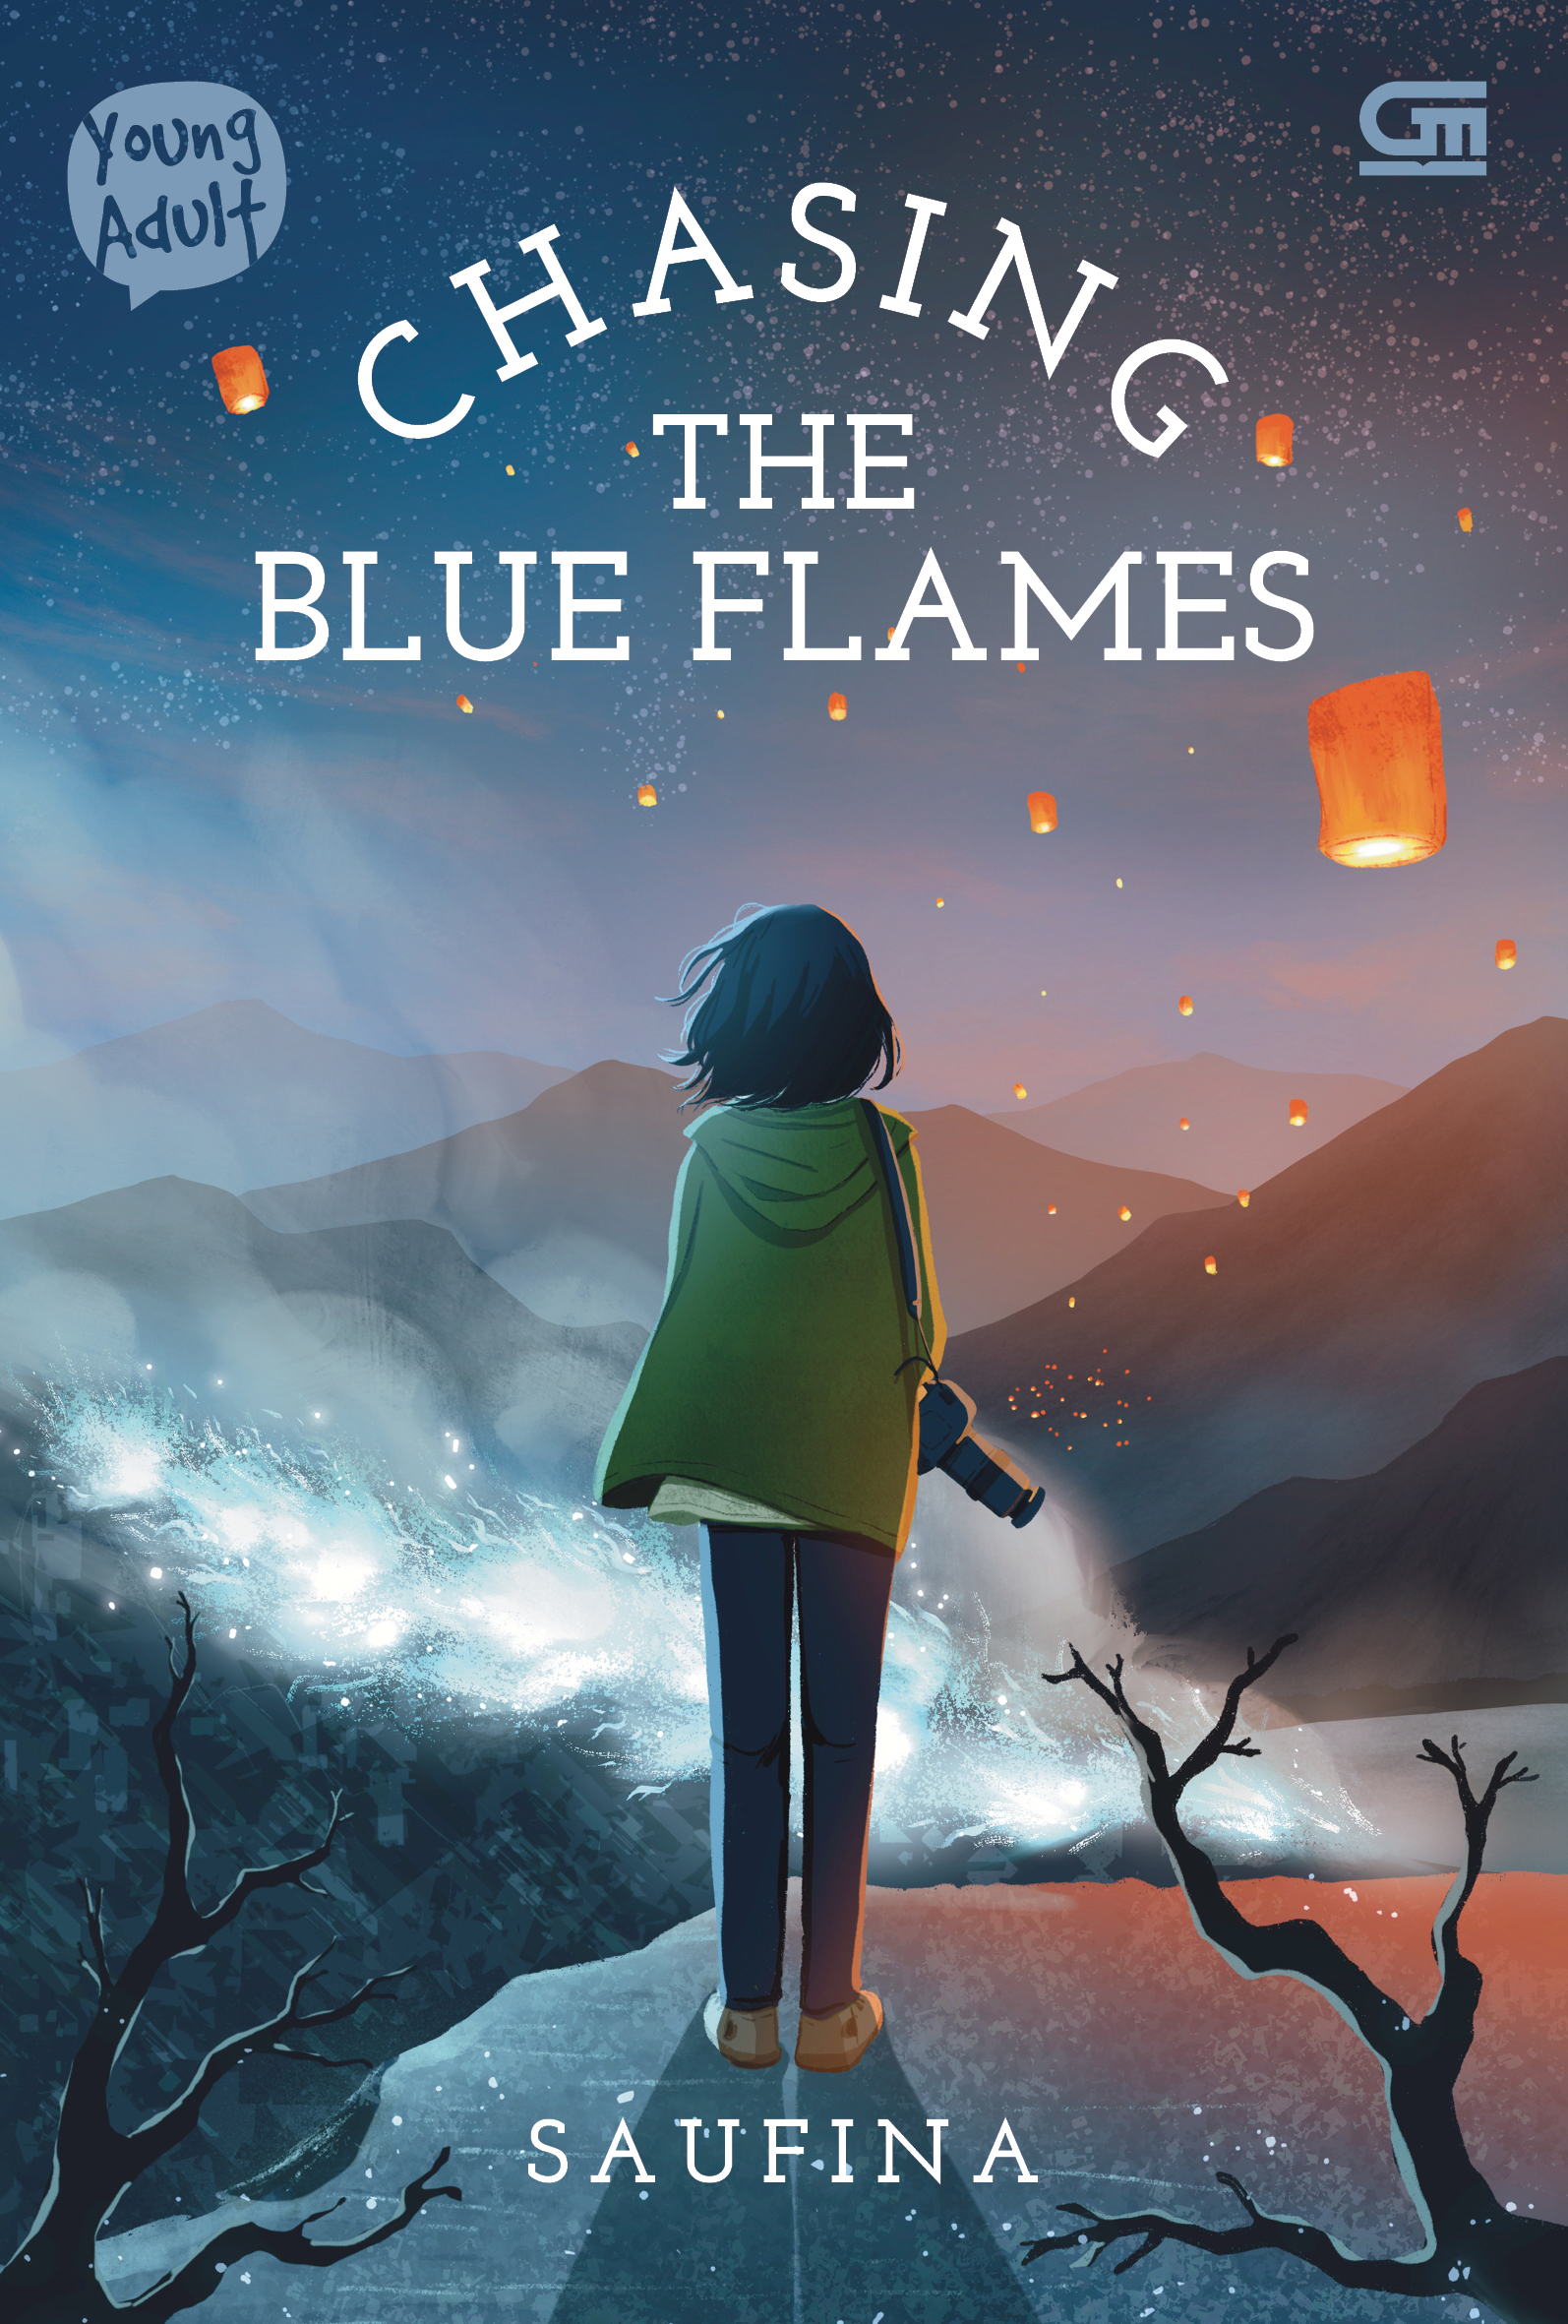 Chasing the blue flames